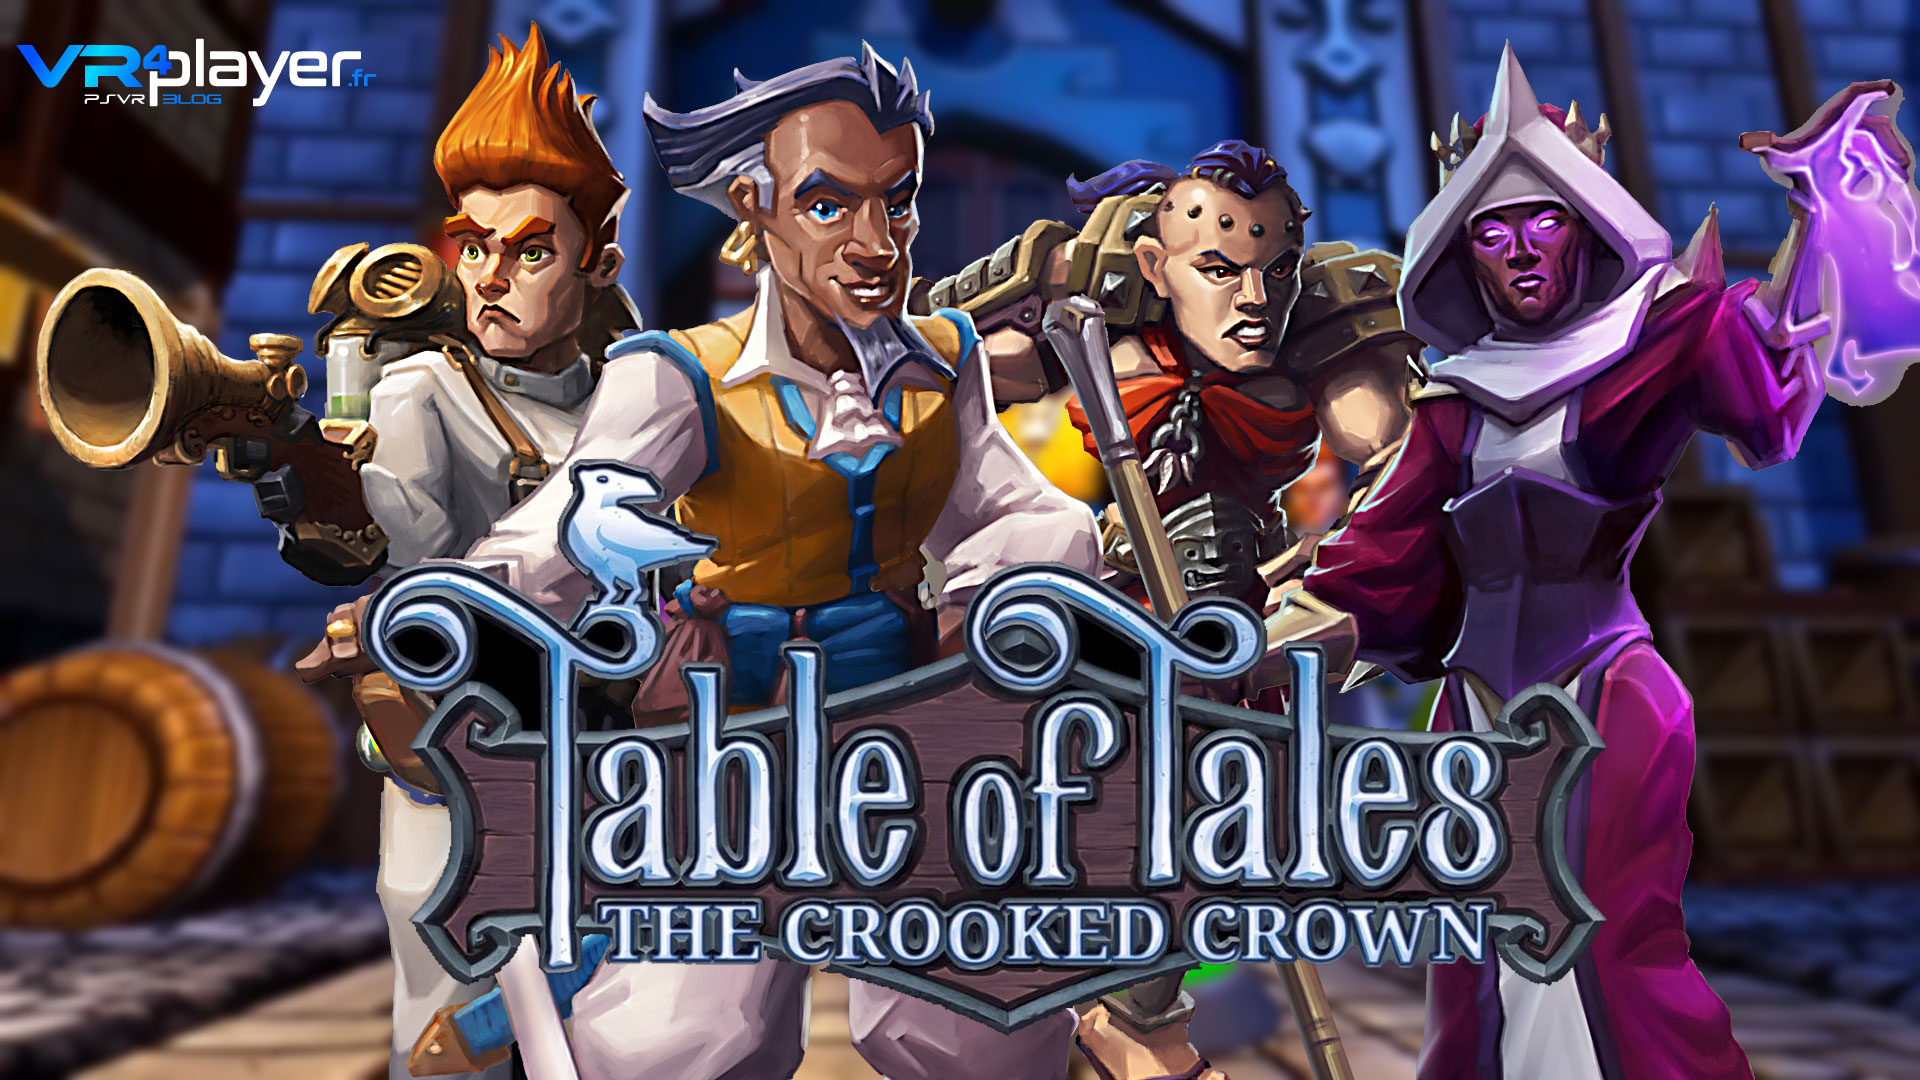 Table of Tales